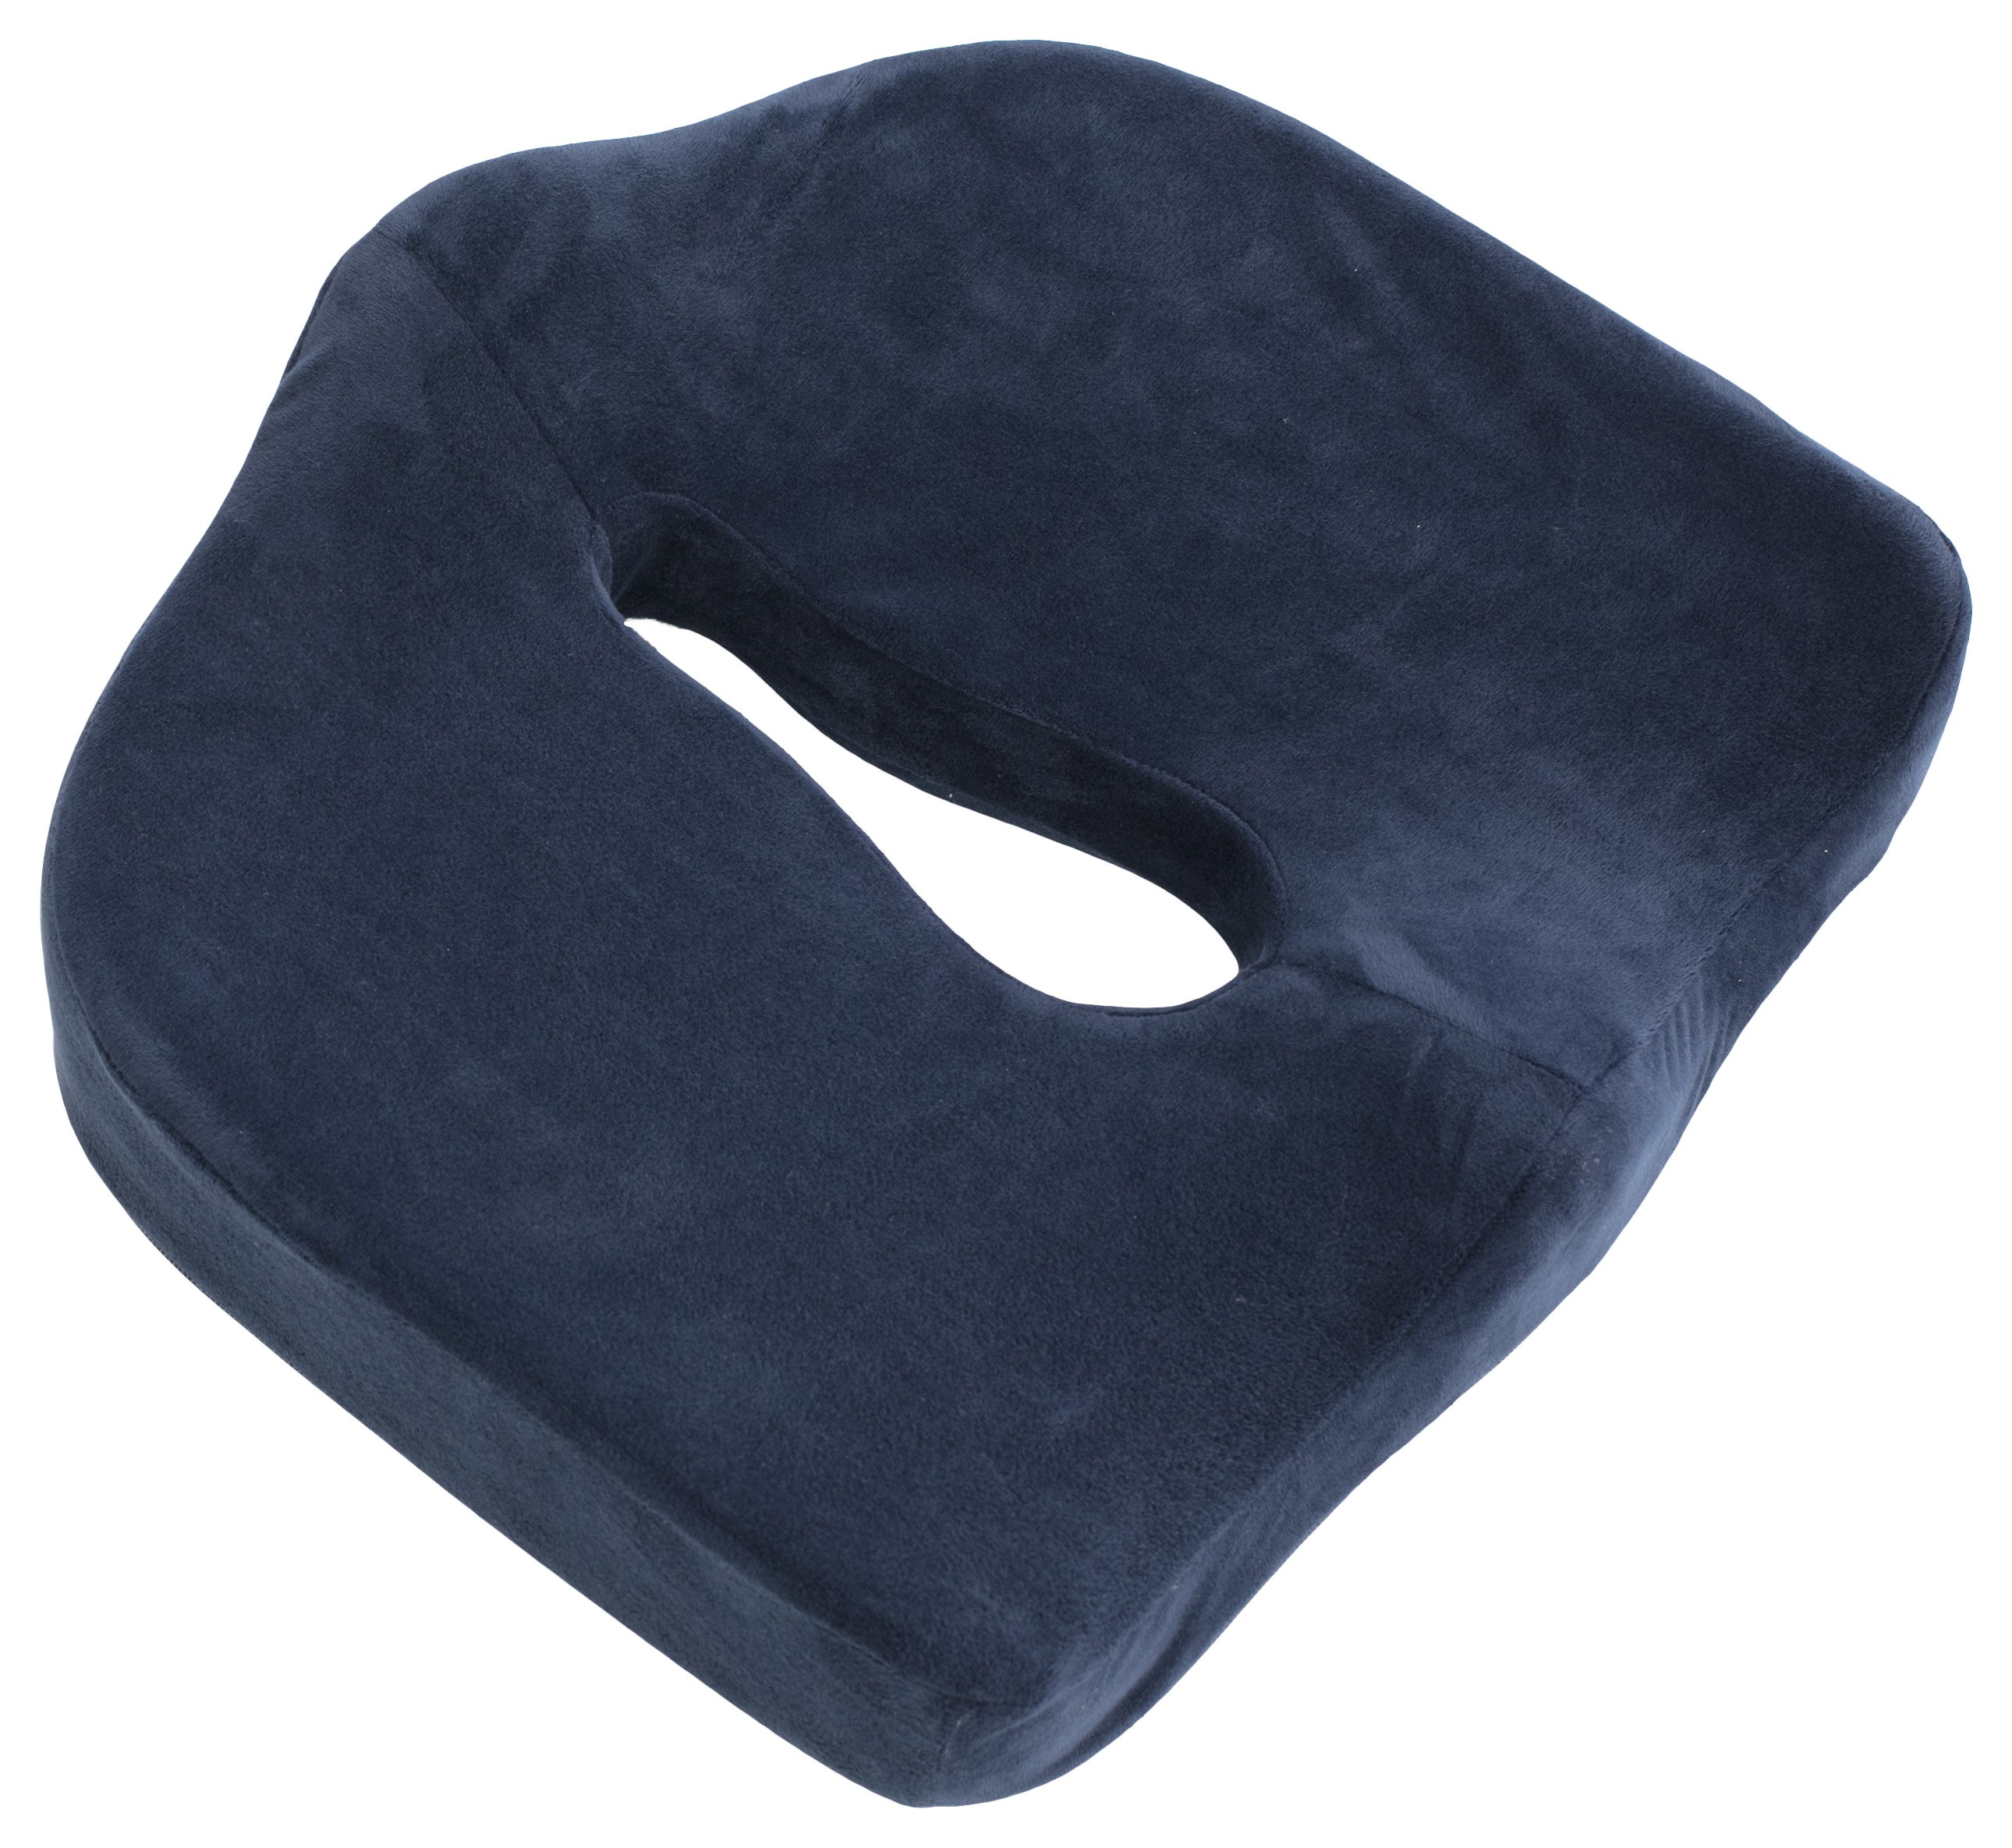 Sciatica Cushion for Coccydynia Pain - Sciatic Nerve  Pillow - Memory Foam Coccyx Seat Cushion Lower Back Pain Cushion Relieves  Tailbone and Sciatica Pain - Car, Office, or Home